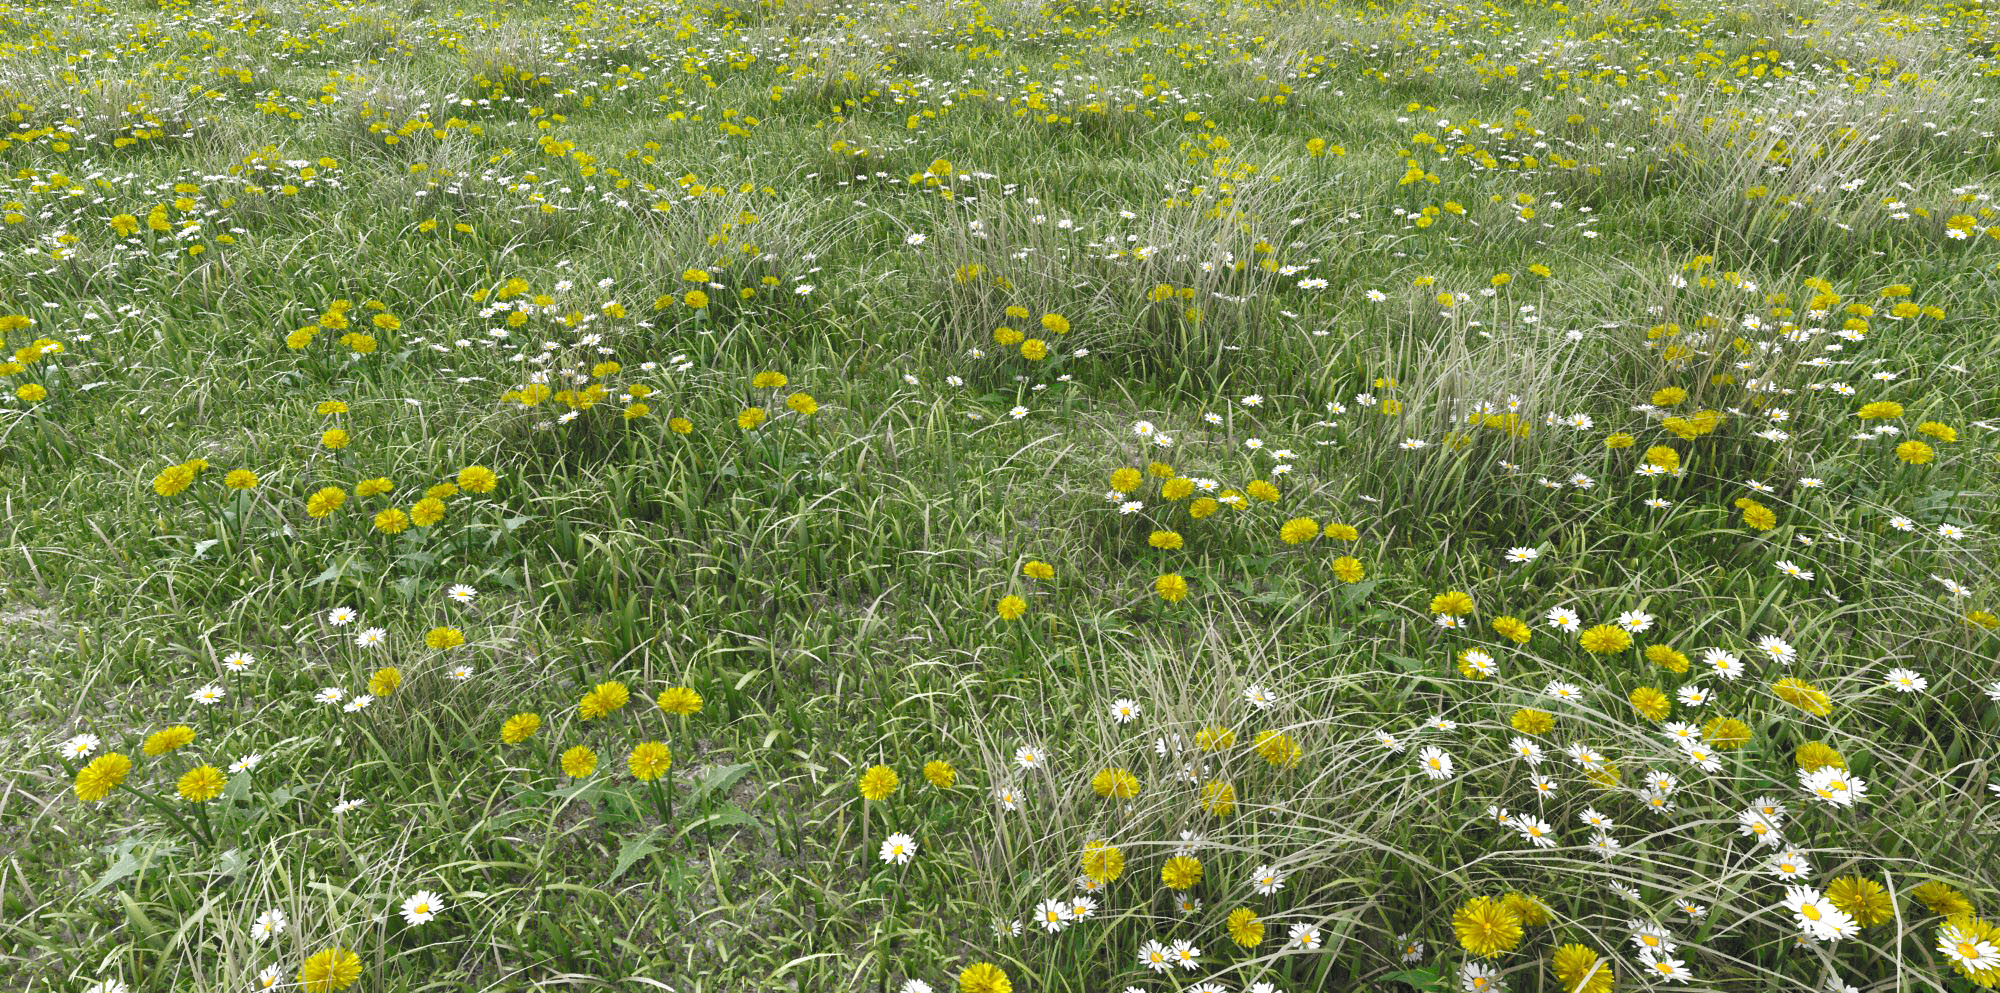 The Meadow - Grass close up